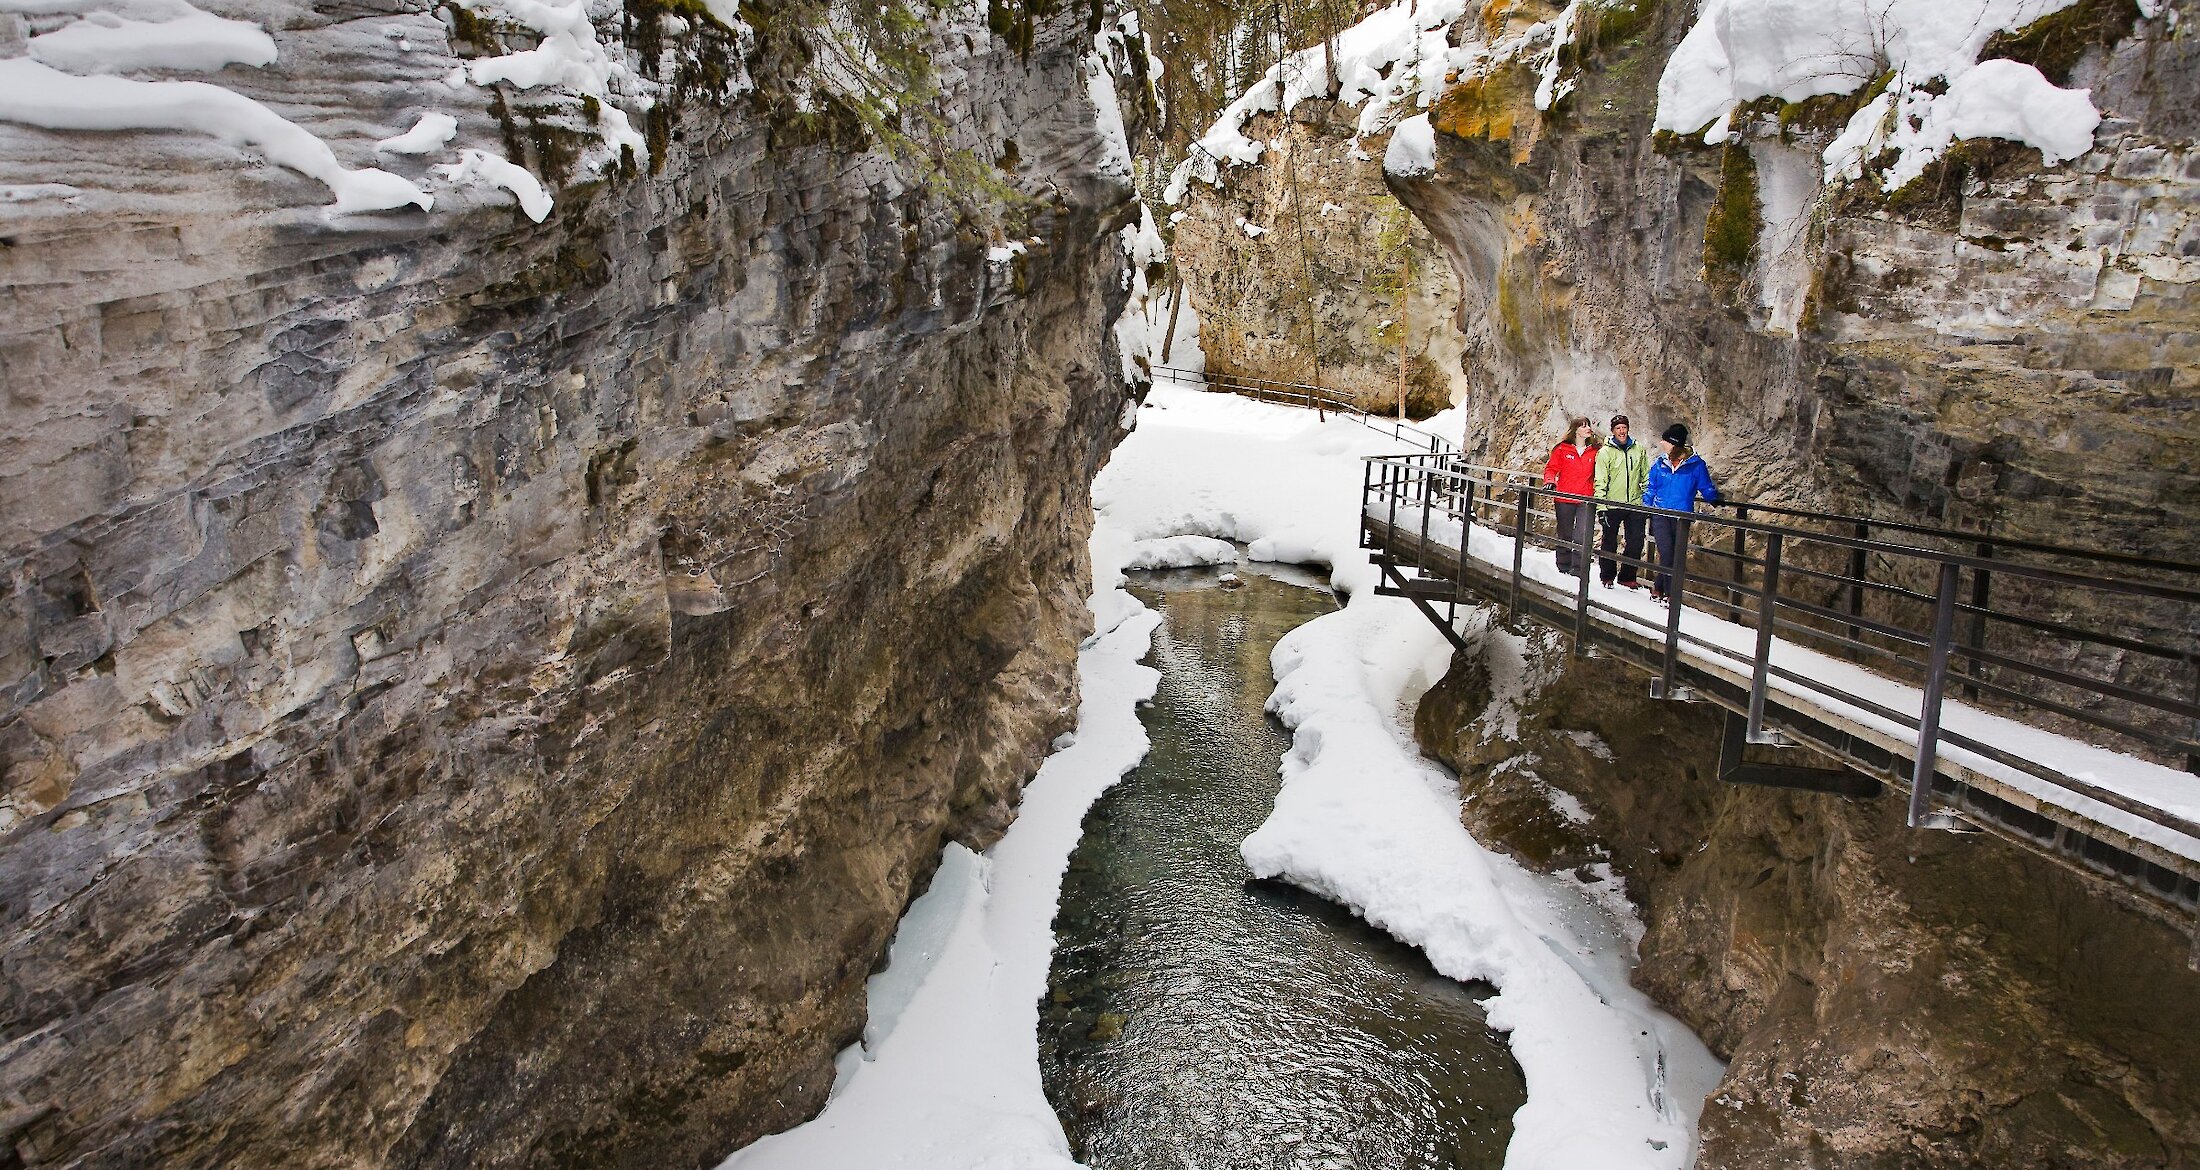 A group walking through the snowy Johnston Canyon in Banff